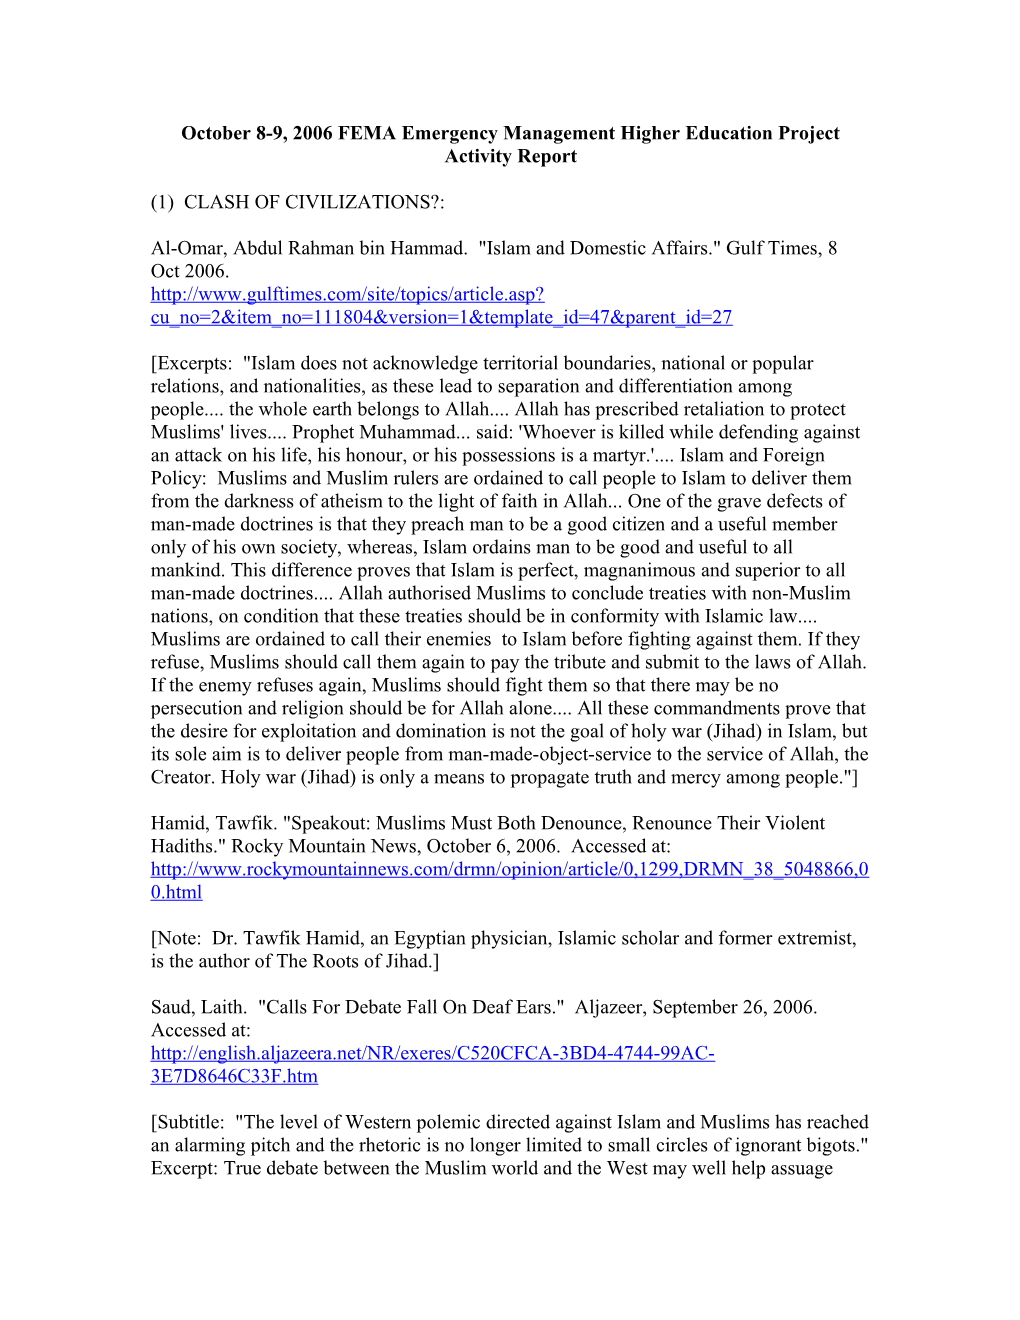 October 8-9, 2006 FEMA Emergency Management Higher Education Project Activity Report